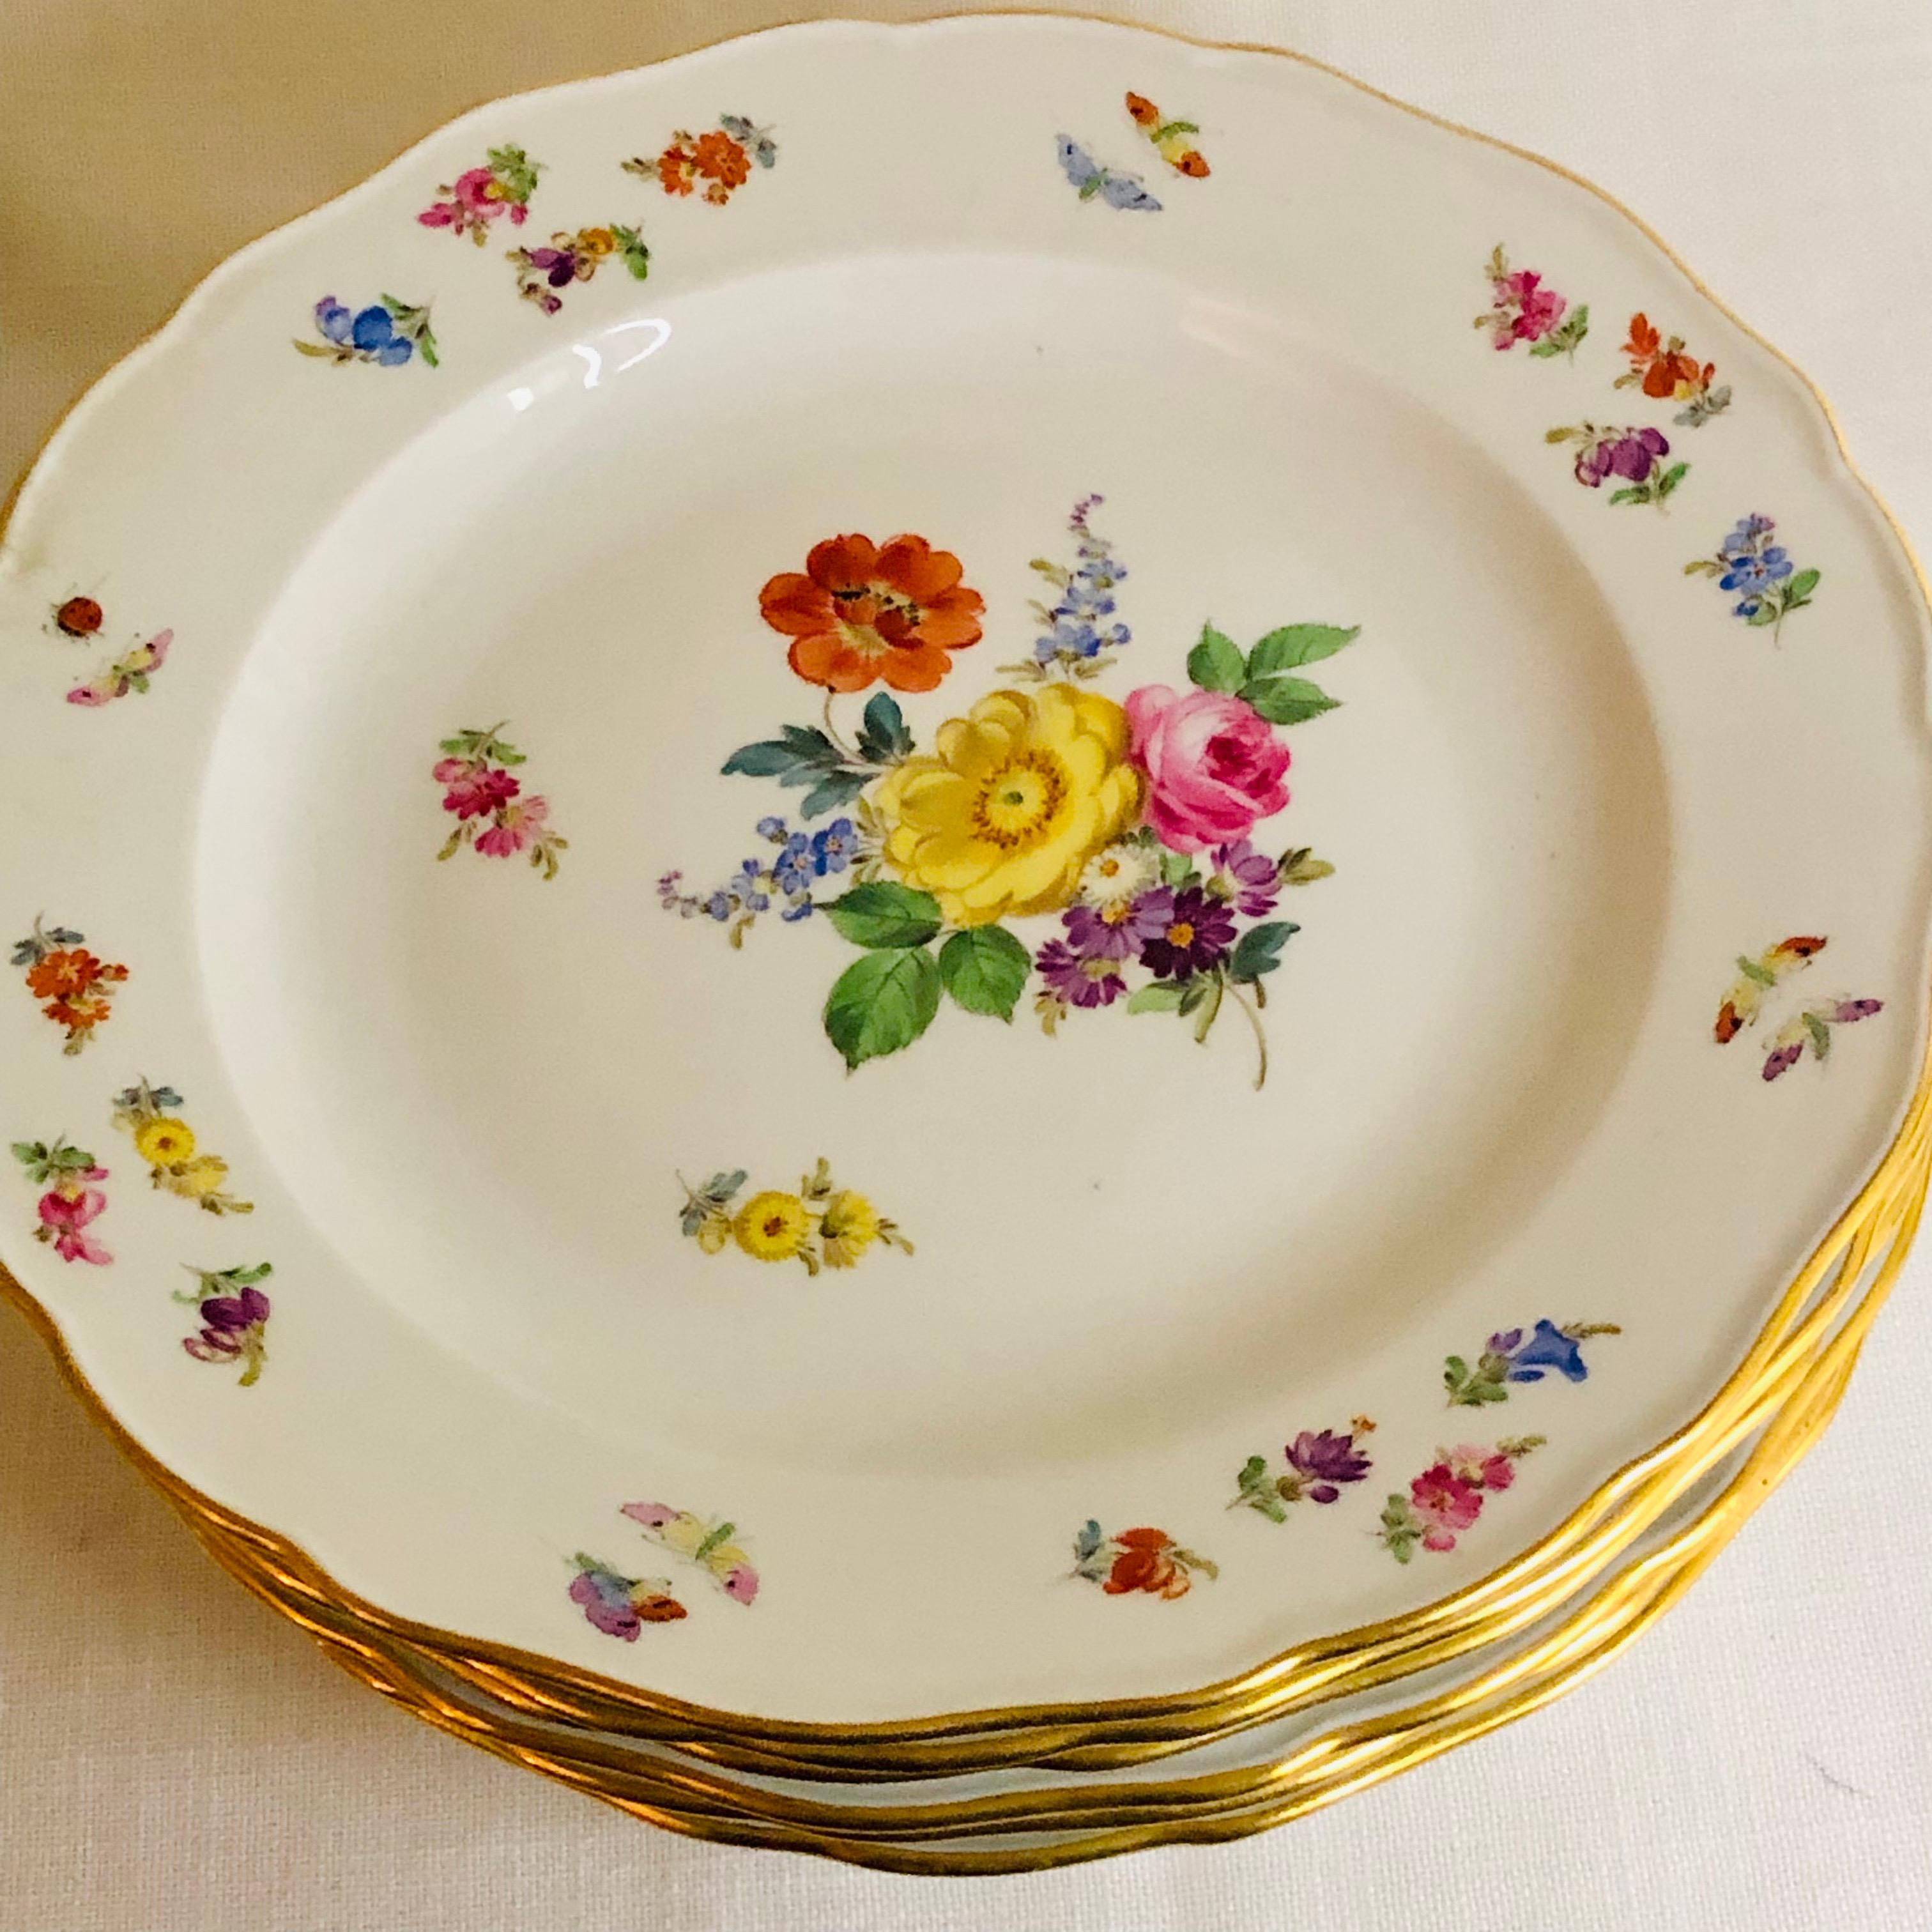 Porcelain Set of 12 Meissen Dinner Plates Each Painted with a Different Bouquet of Flowers